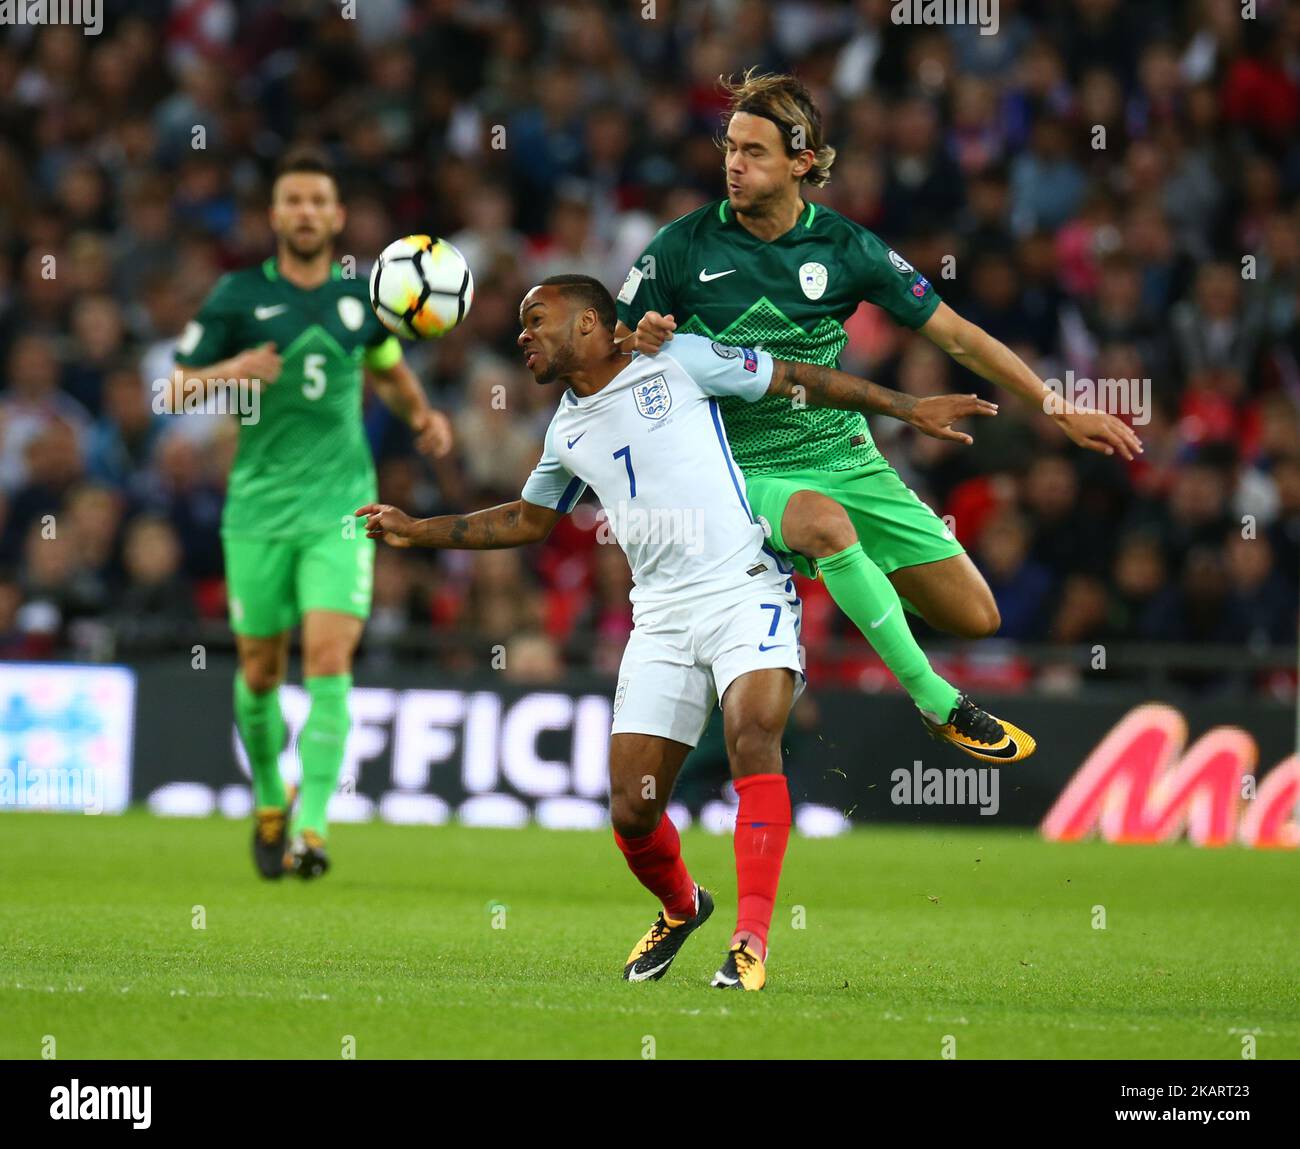 Raheem Sterling of England in action against Rene Krhin of Slovenia during FIFA World Cup Qualifying - European Region - Group F match between England and Slovenia at Wembley stadium in London, UK on October 5, 2017. (Photo by Kieran Galvin/NurPhoto) Stock Photo